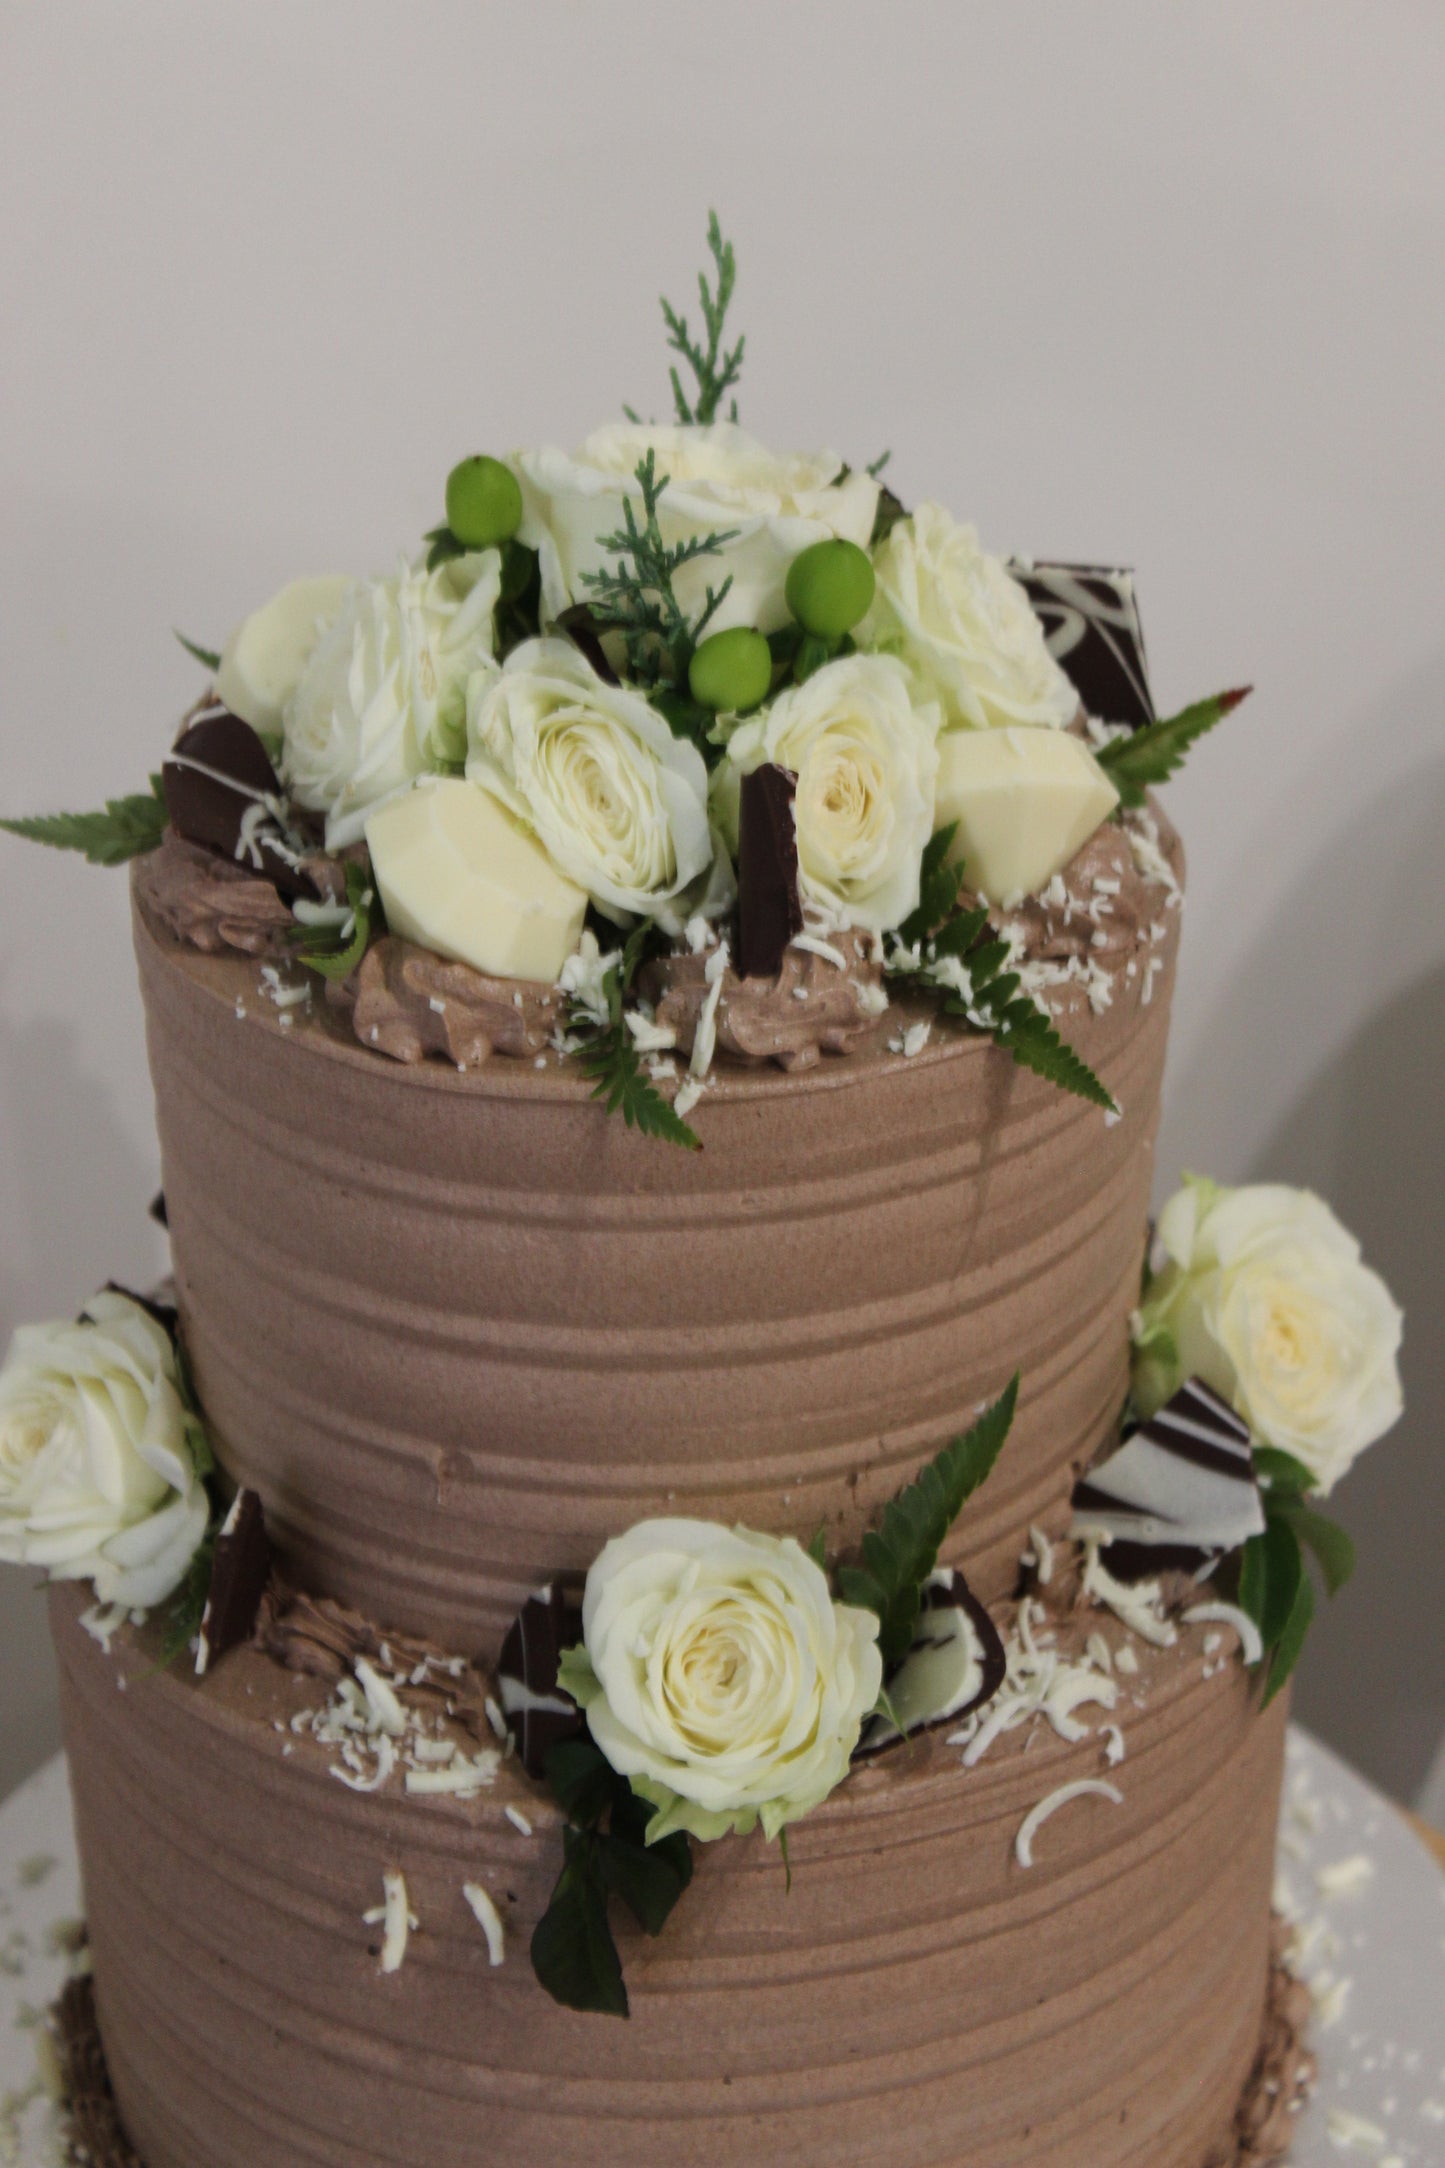 2 Tier Chocolate Buttercream Cake With Flowers